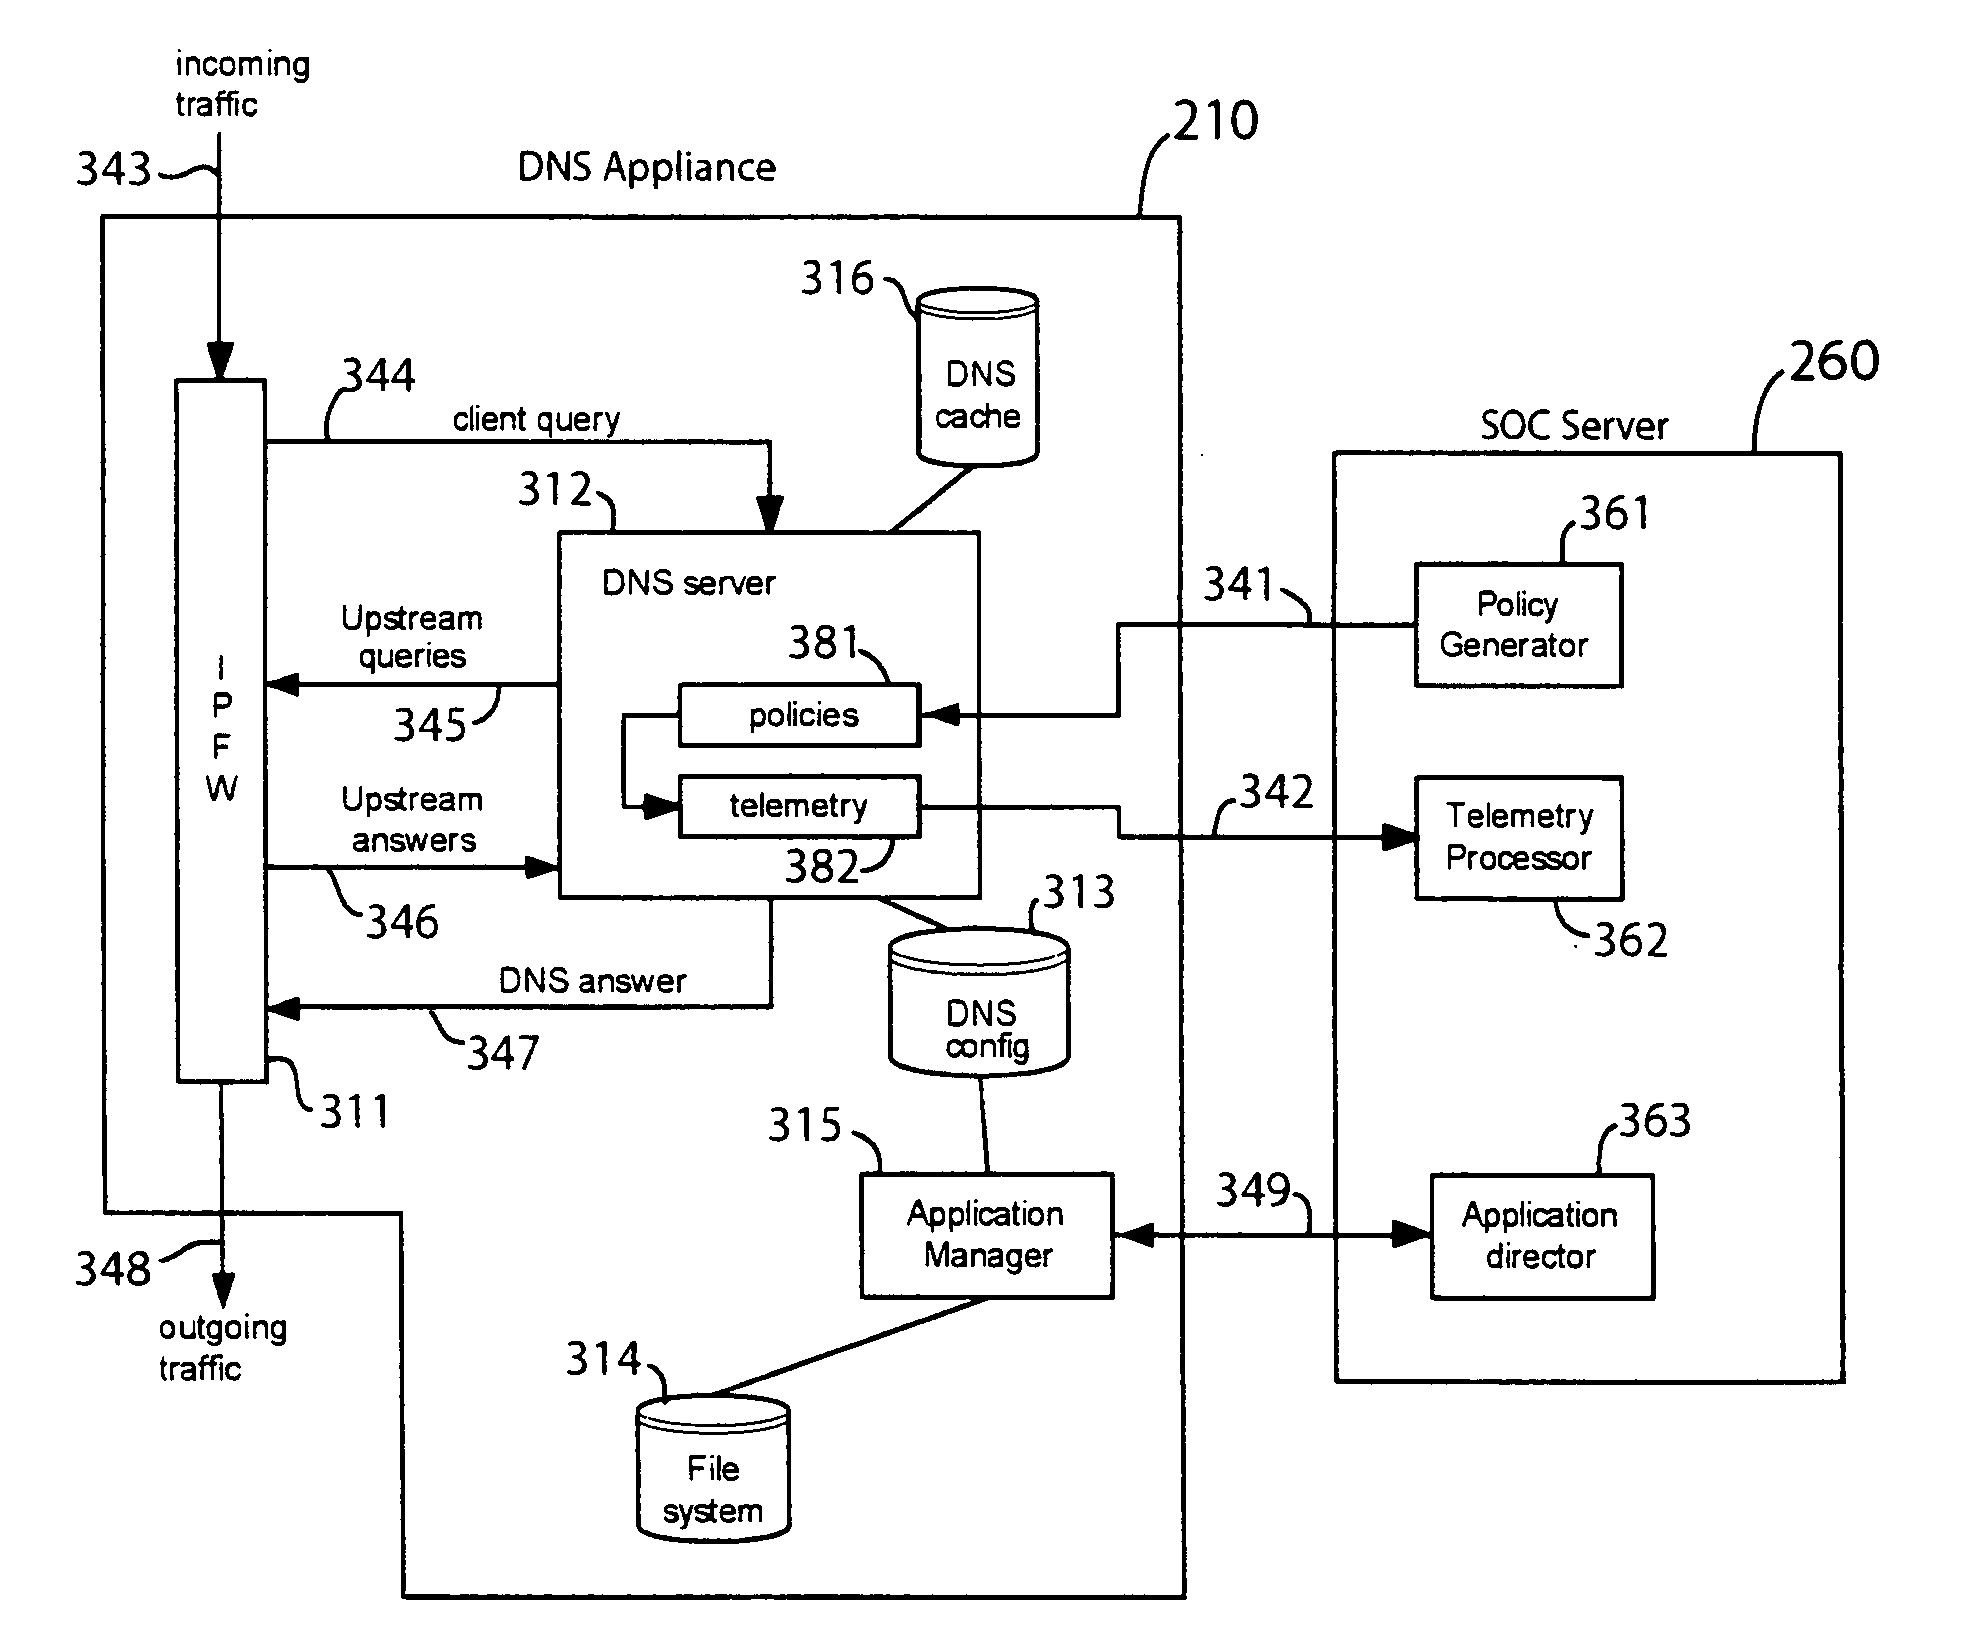 SMTP network security processing in a transparent relay in a computer network